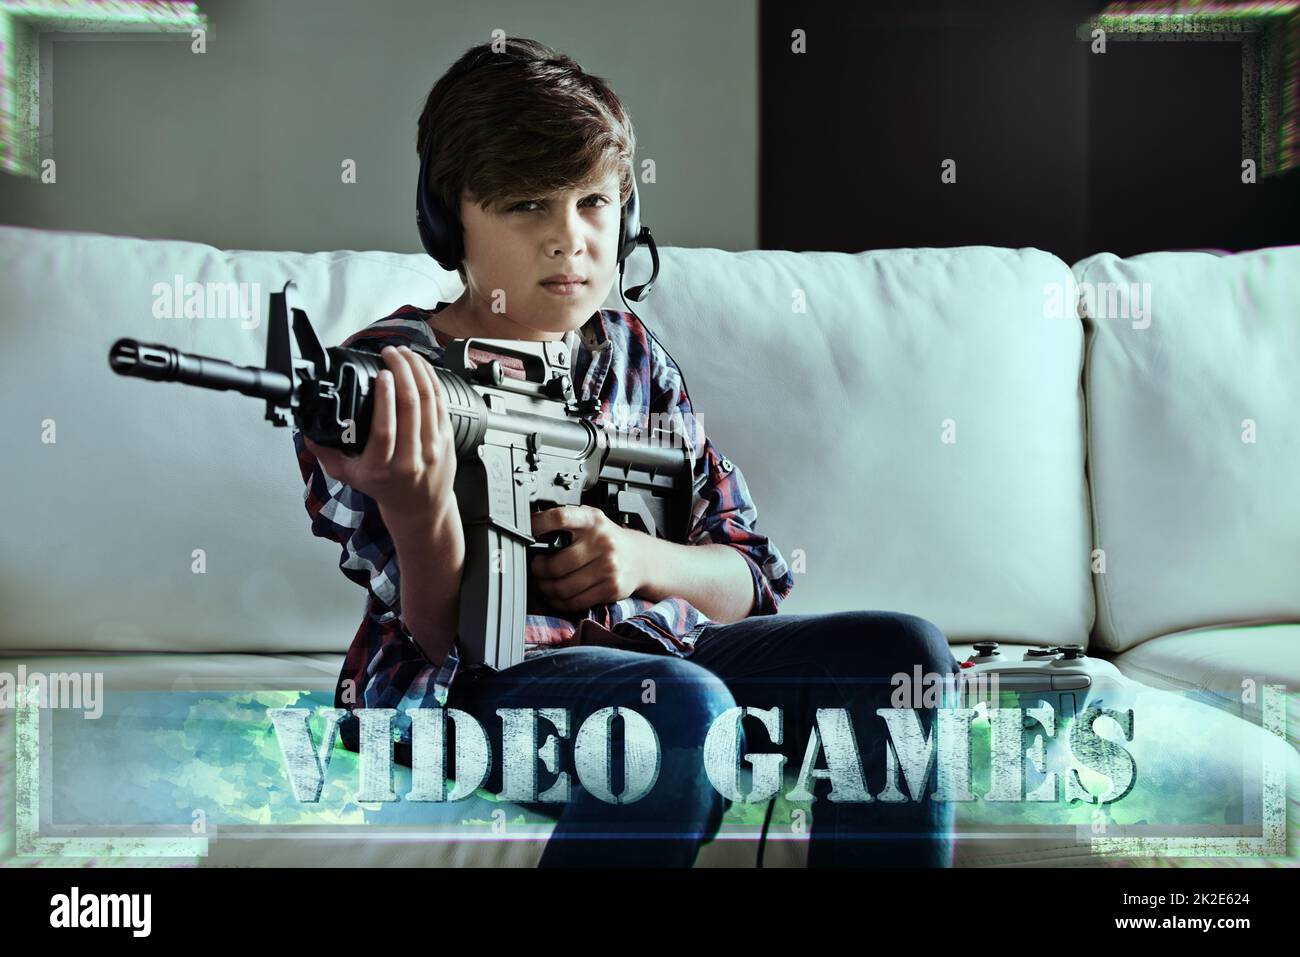 Lock and load time. Shot of a young boy playing violent video games. Stock Photo